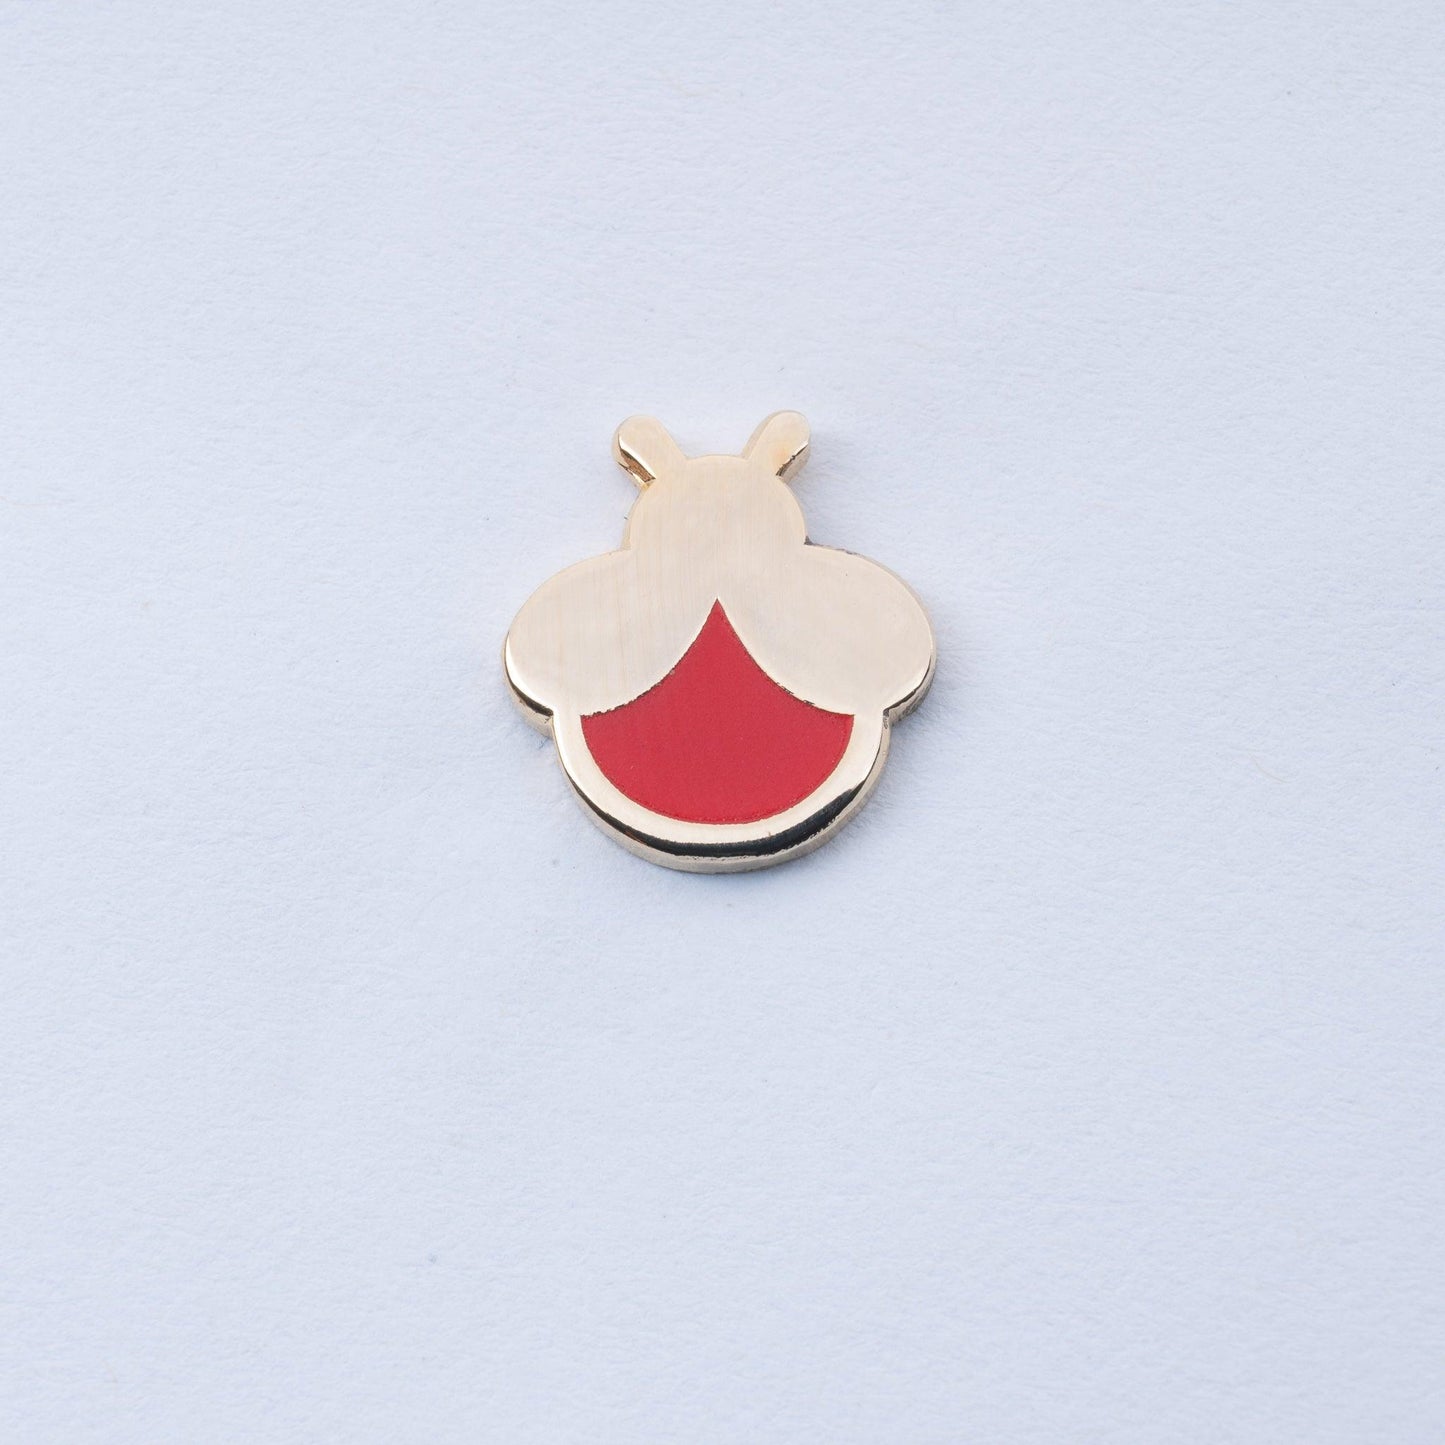 gold plated mini firefly enamel pin with red body that glows in the dark